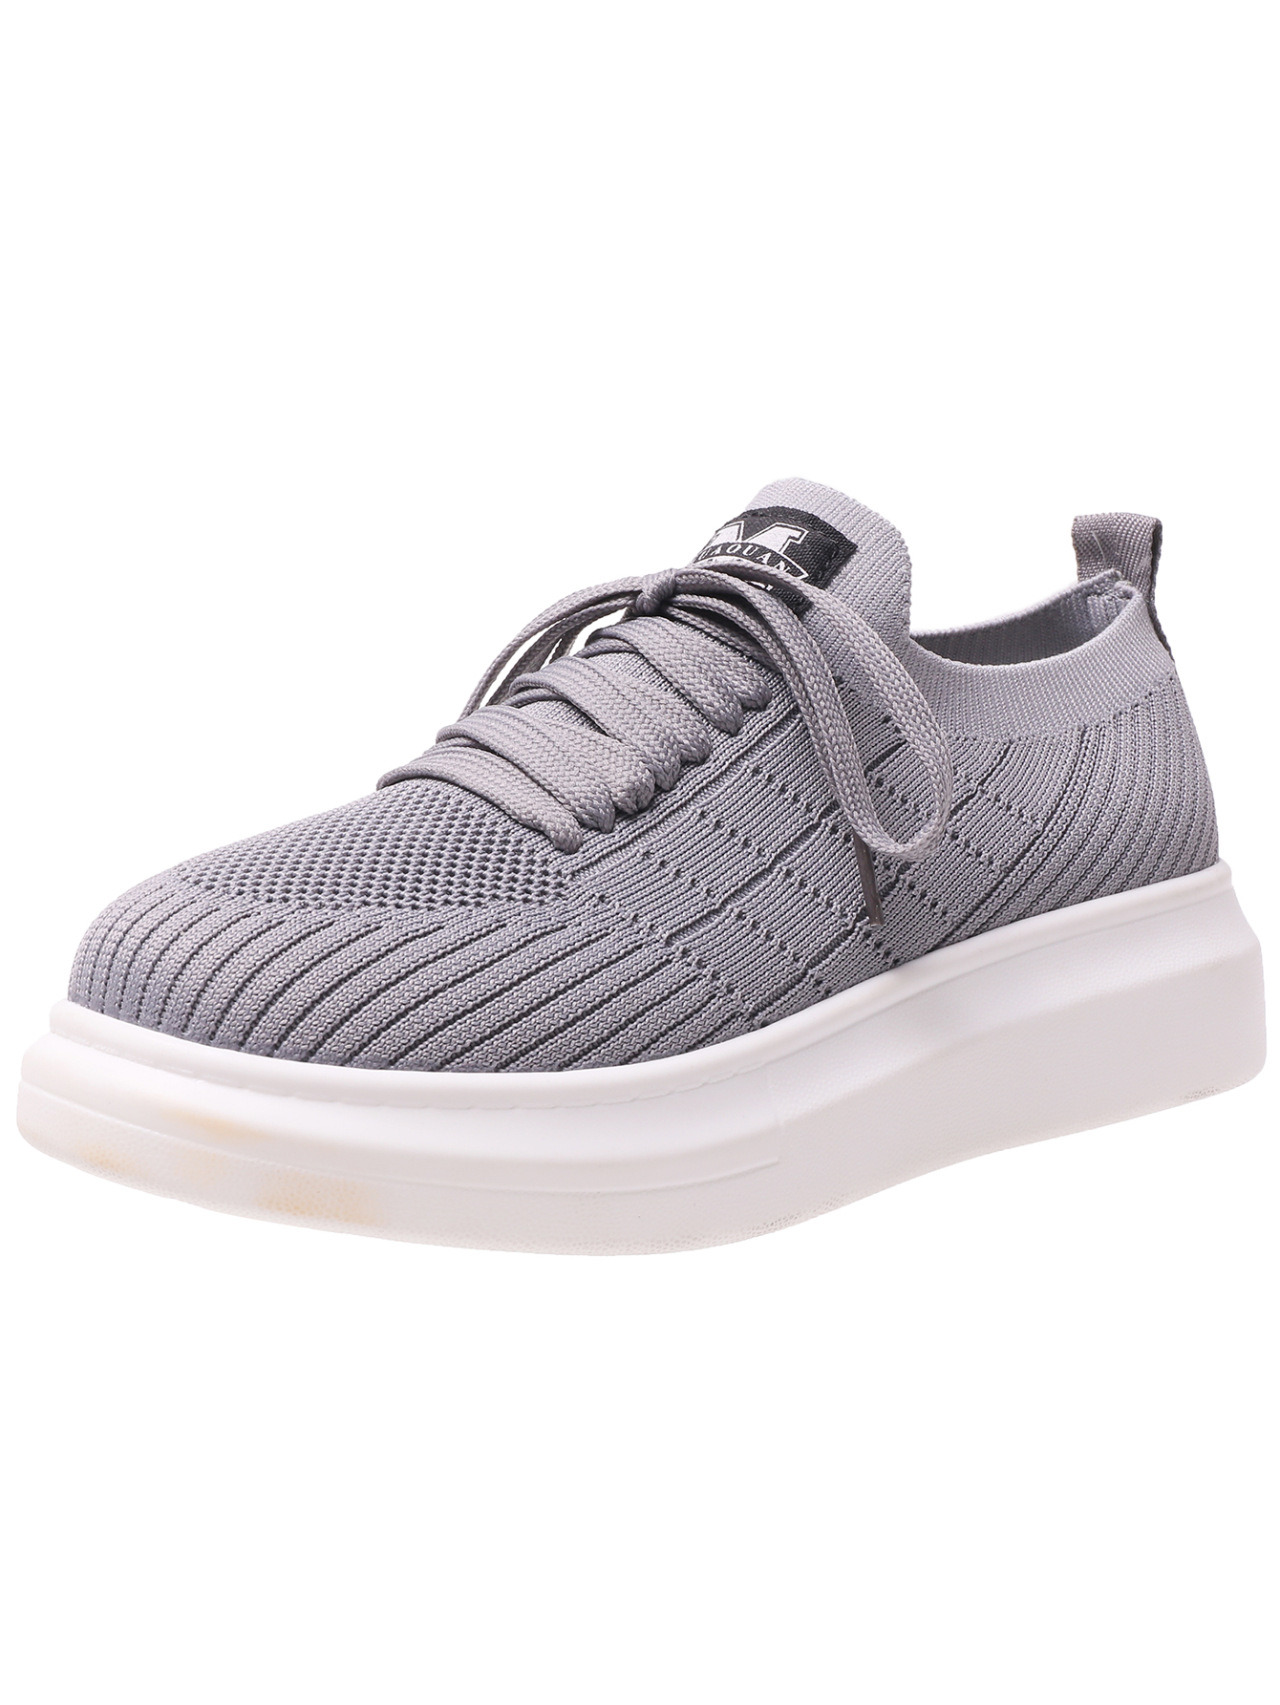 LW BASICS Round Toe Breathable Sneakers